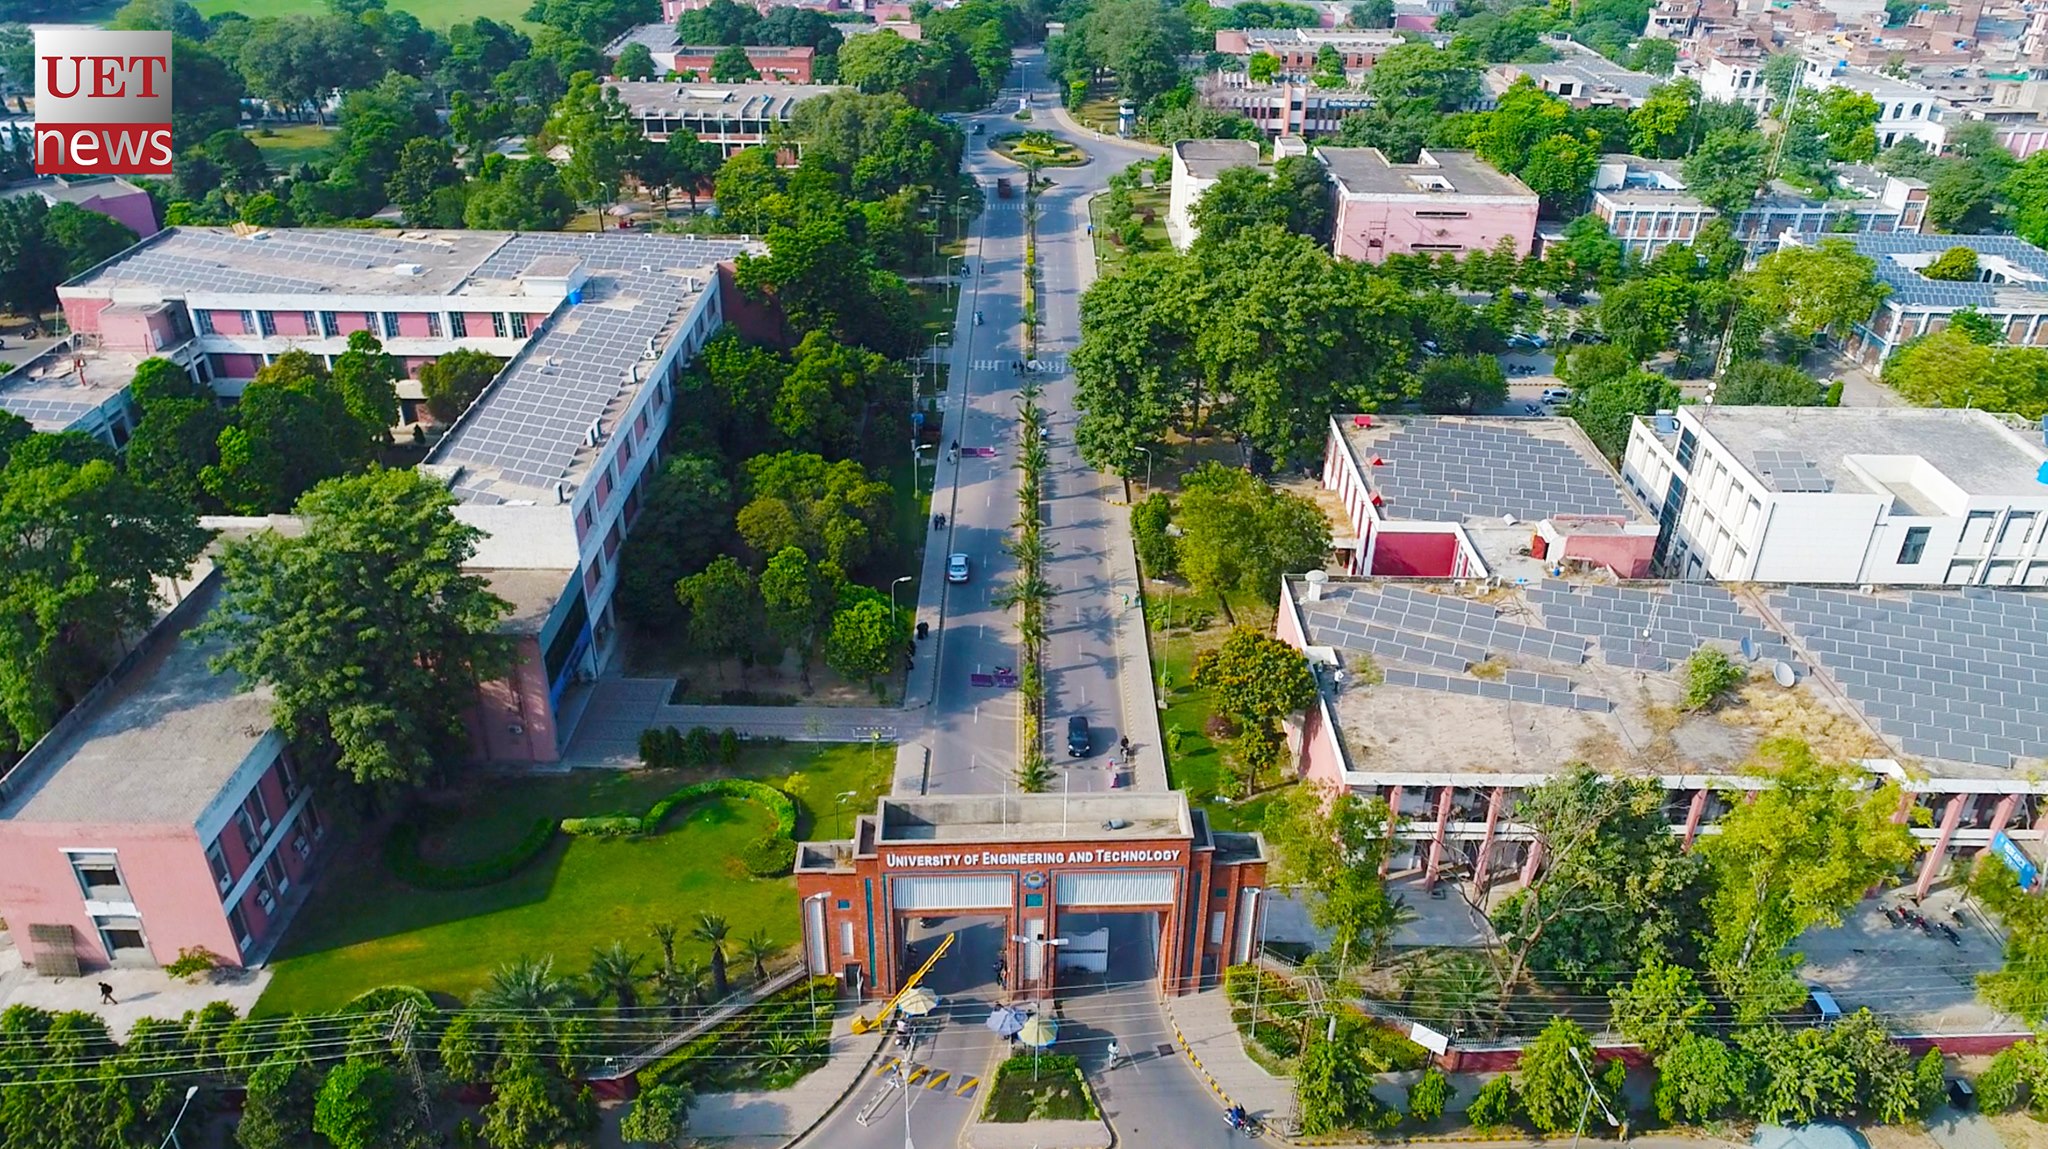 The University of Engineering and Technology (UET) Lahore organized STEM (Science, Technology, Engineering, Mathematics) competitions and a display of final year projects